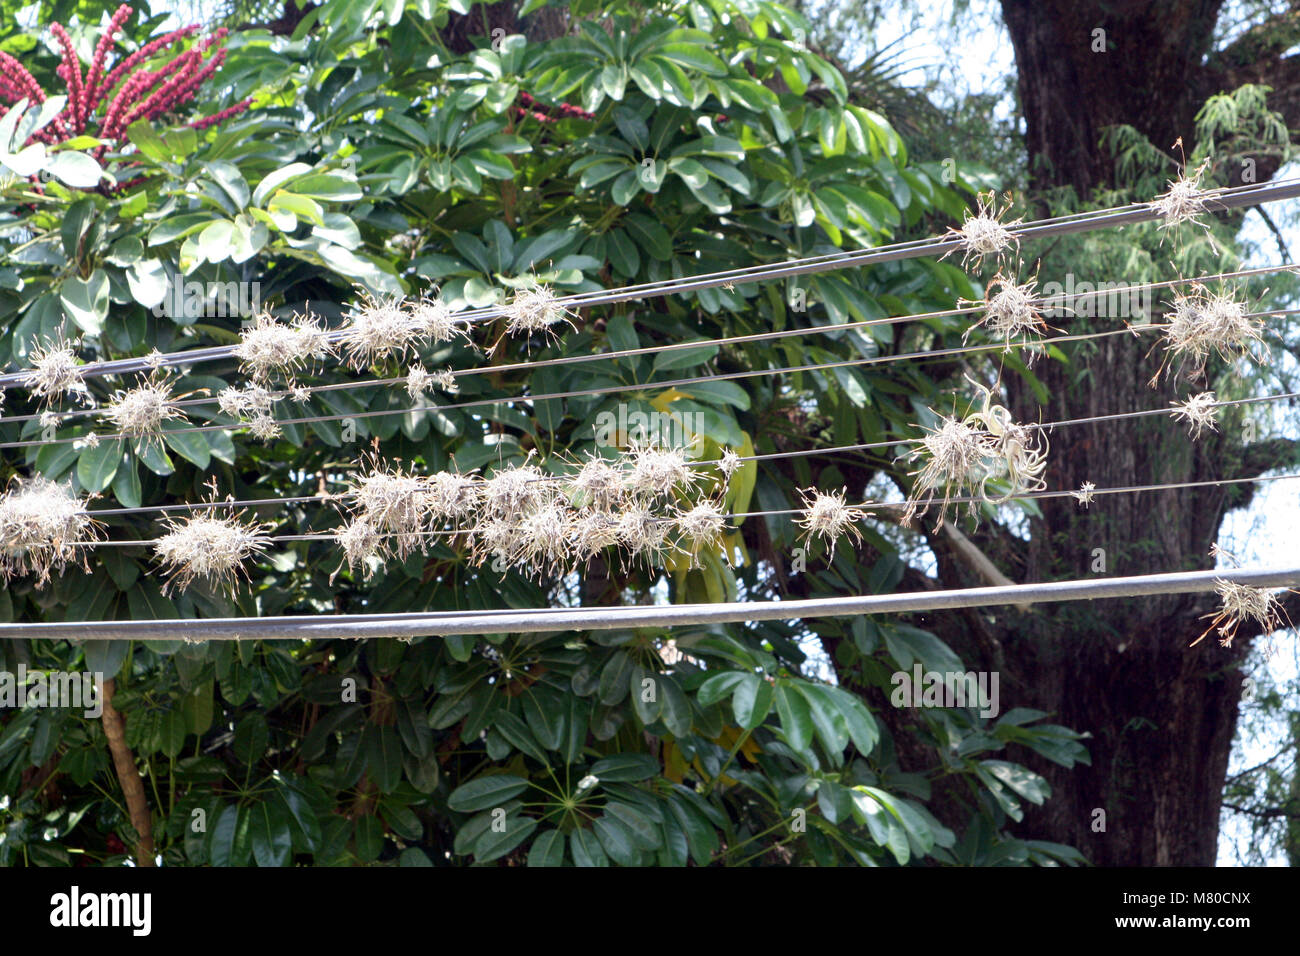 Ball moss growing on wires. Oaxtepec, Mexico Stock Photo